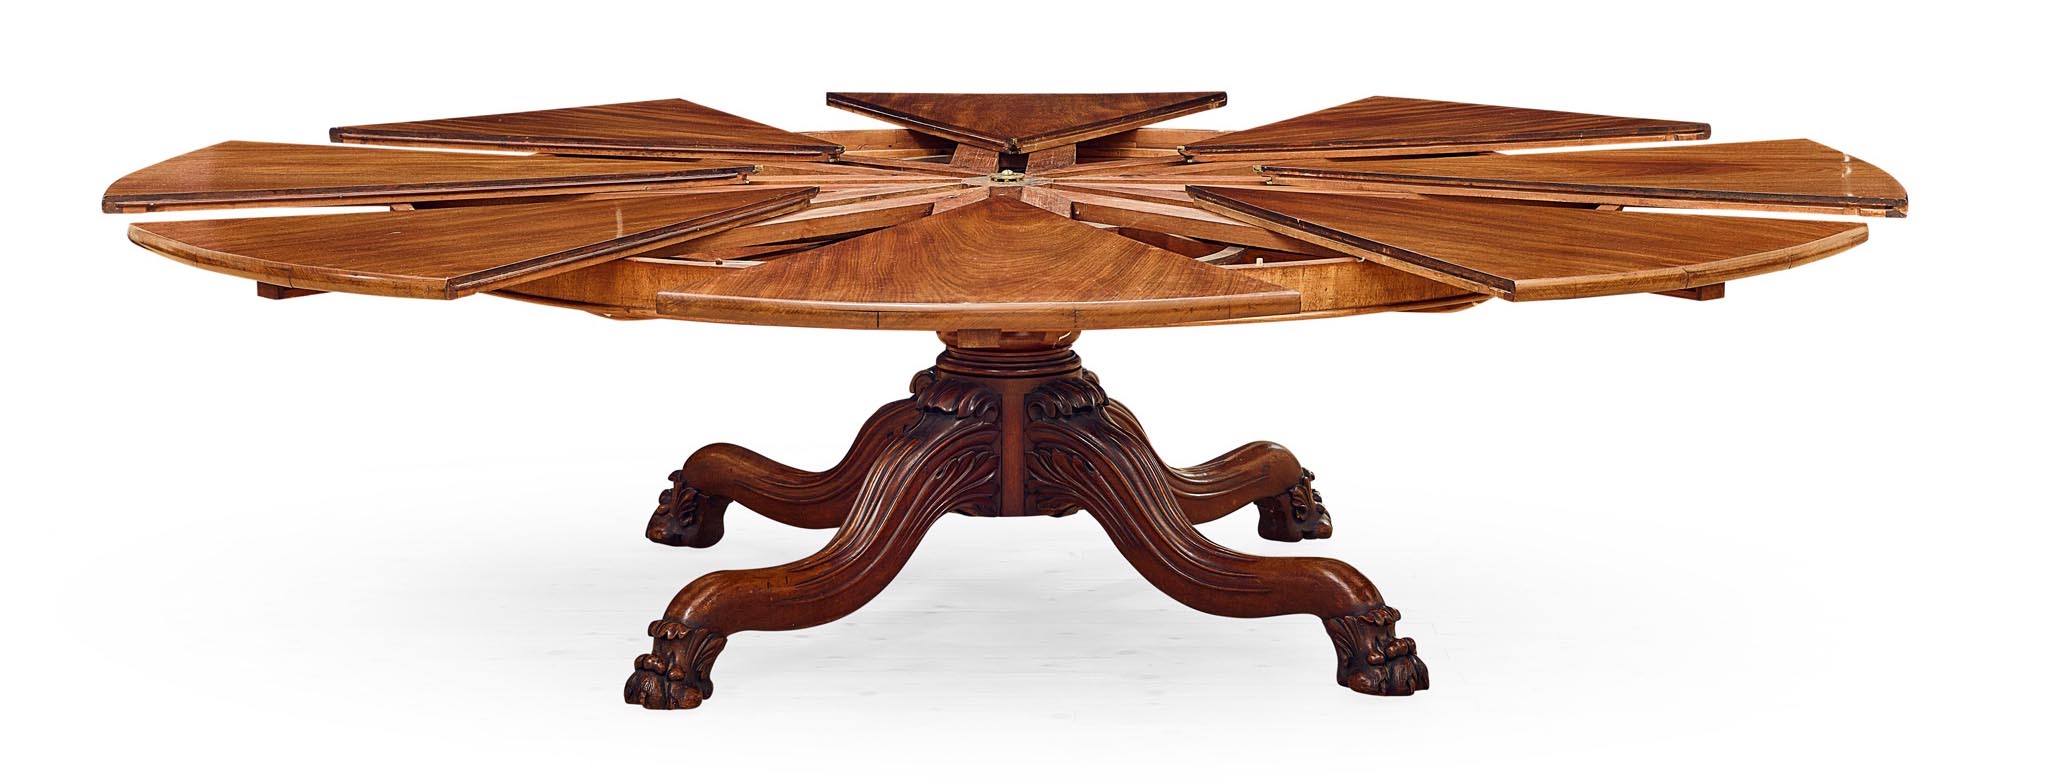 WILLIAM IV MAHOGANY 'JUPE'S PATENT' EXTENDING DINING TABLE, BY JOHNSTONE, JUPE & CO. CIRCA 1835-40 | £100,000 - £150,000 + fees